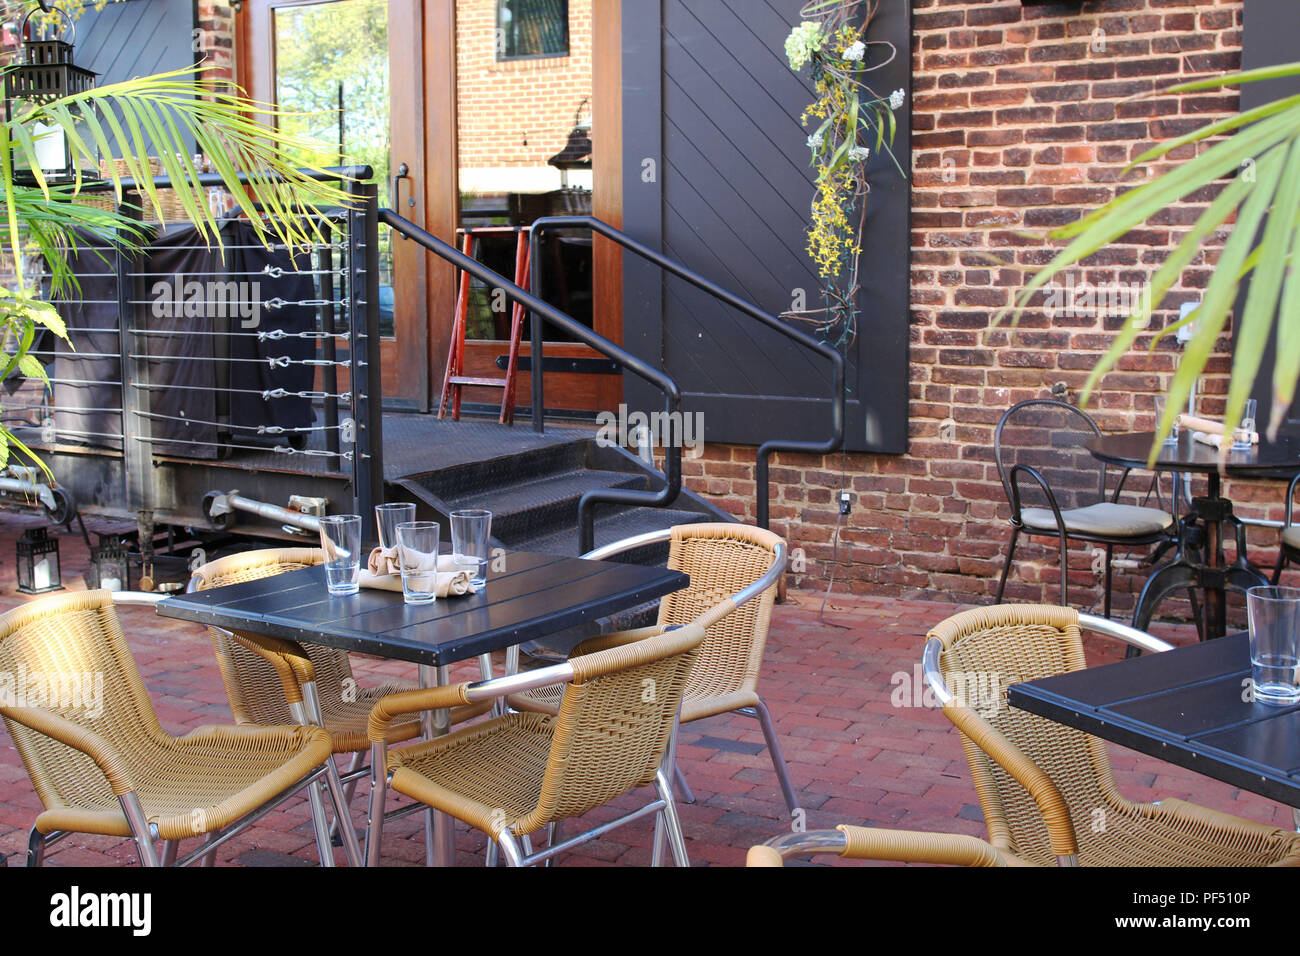 Tables with chairs at an open air cafe with no visitors, Old Town Alexandria, Virginia Stock Photo